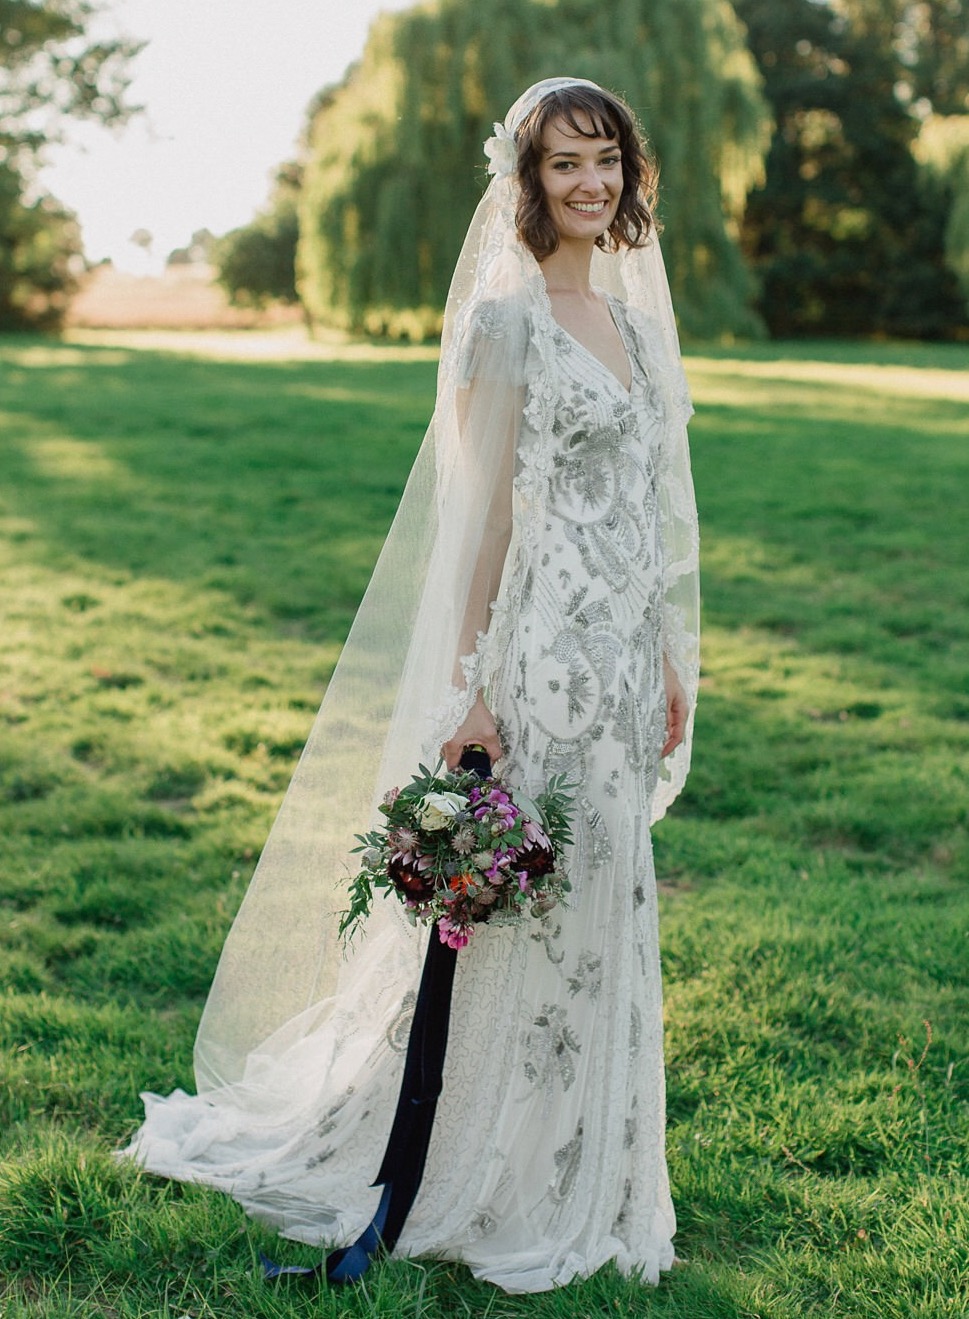 Sell my wedding dress - Search for a dress